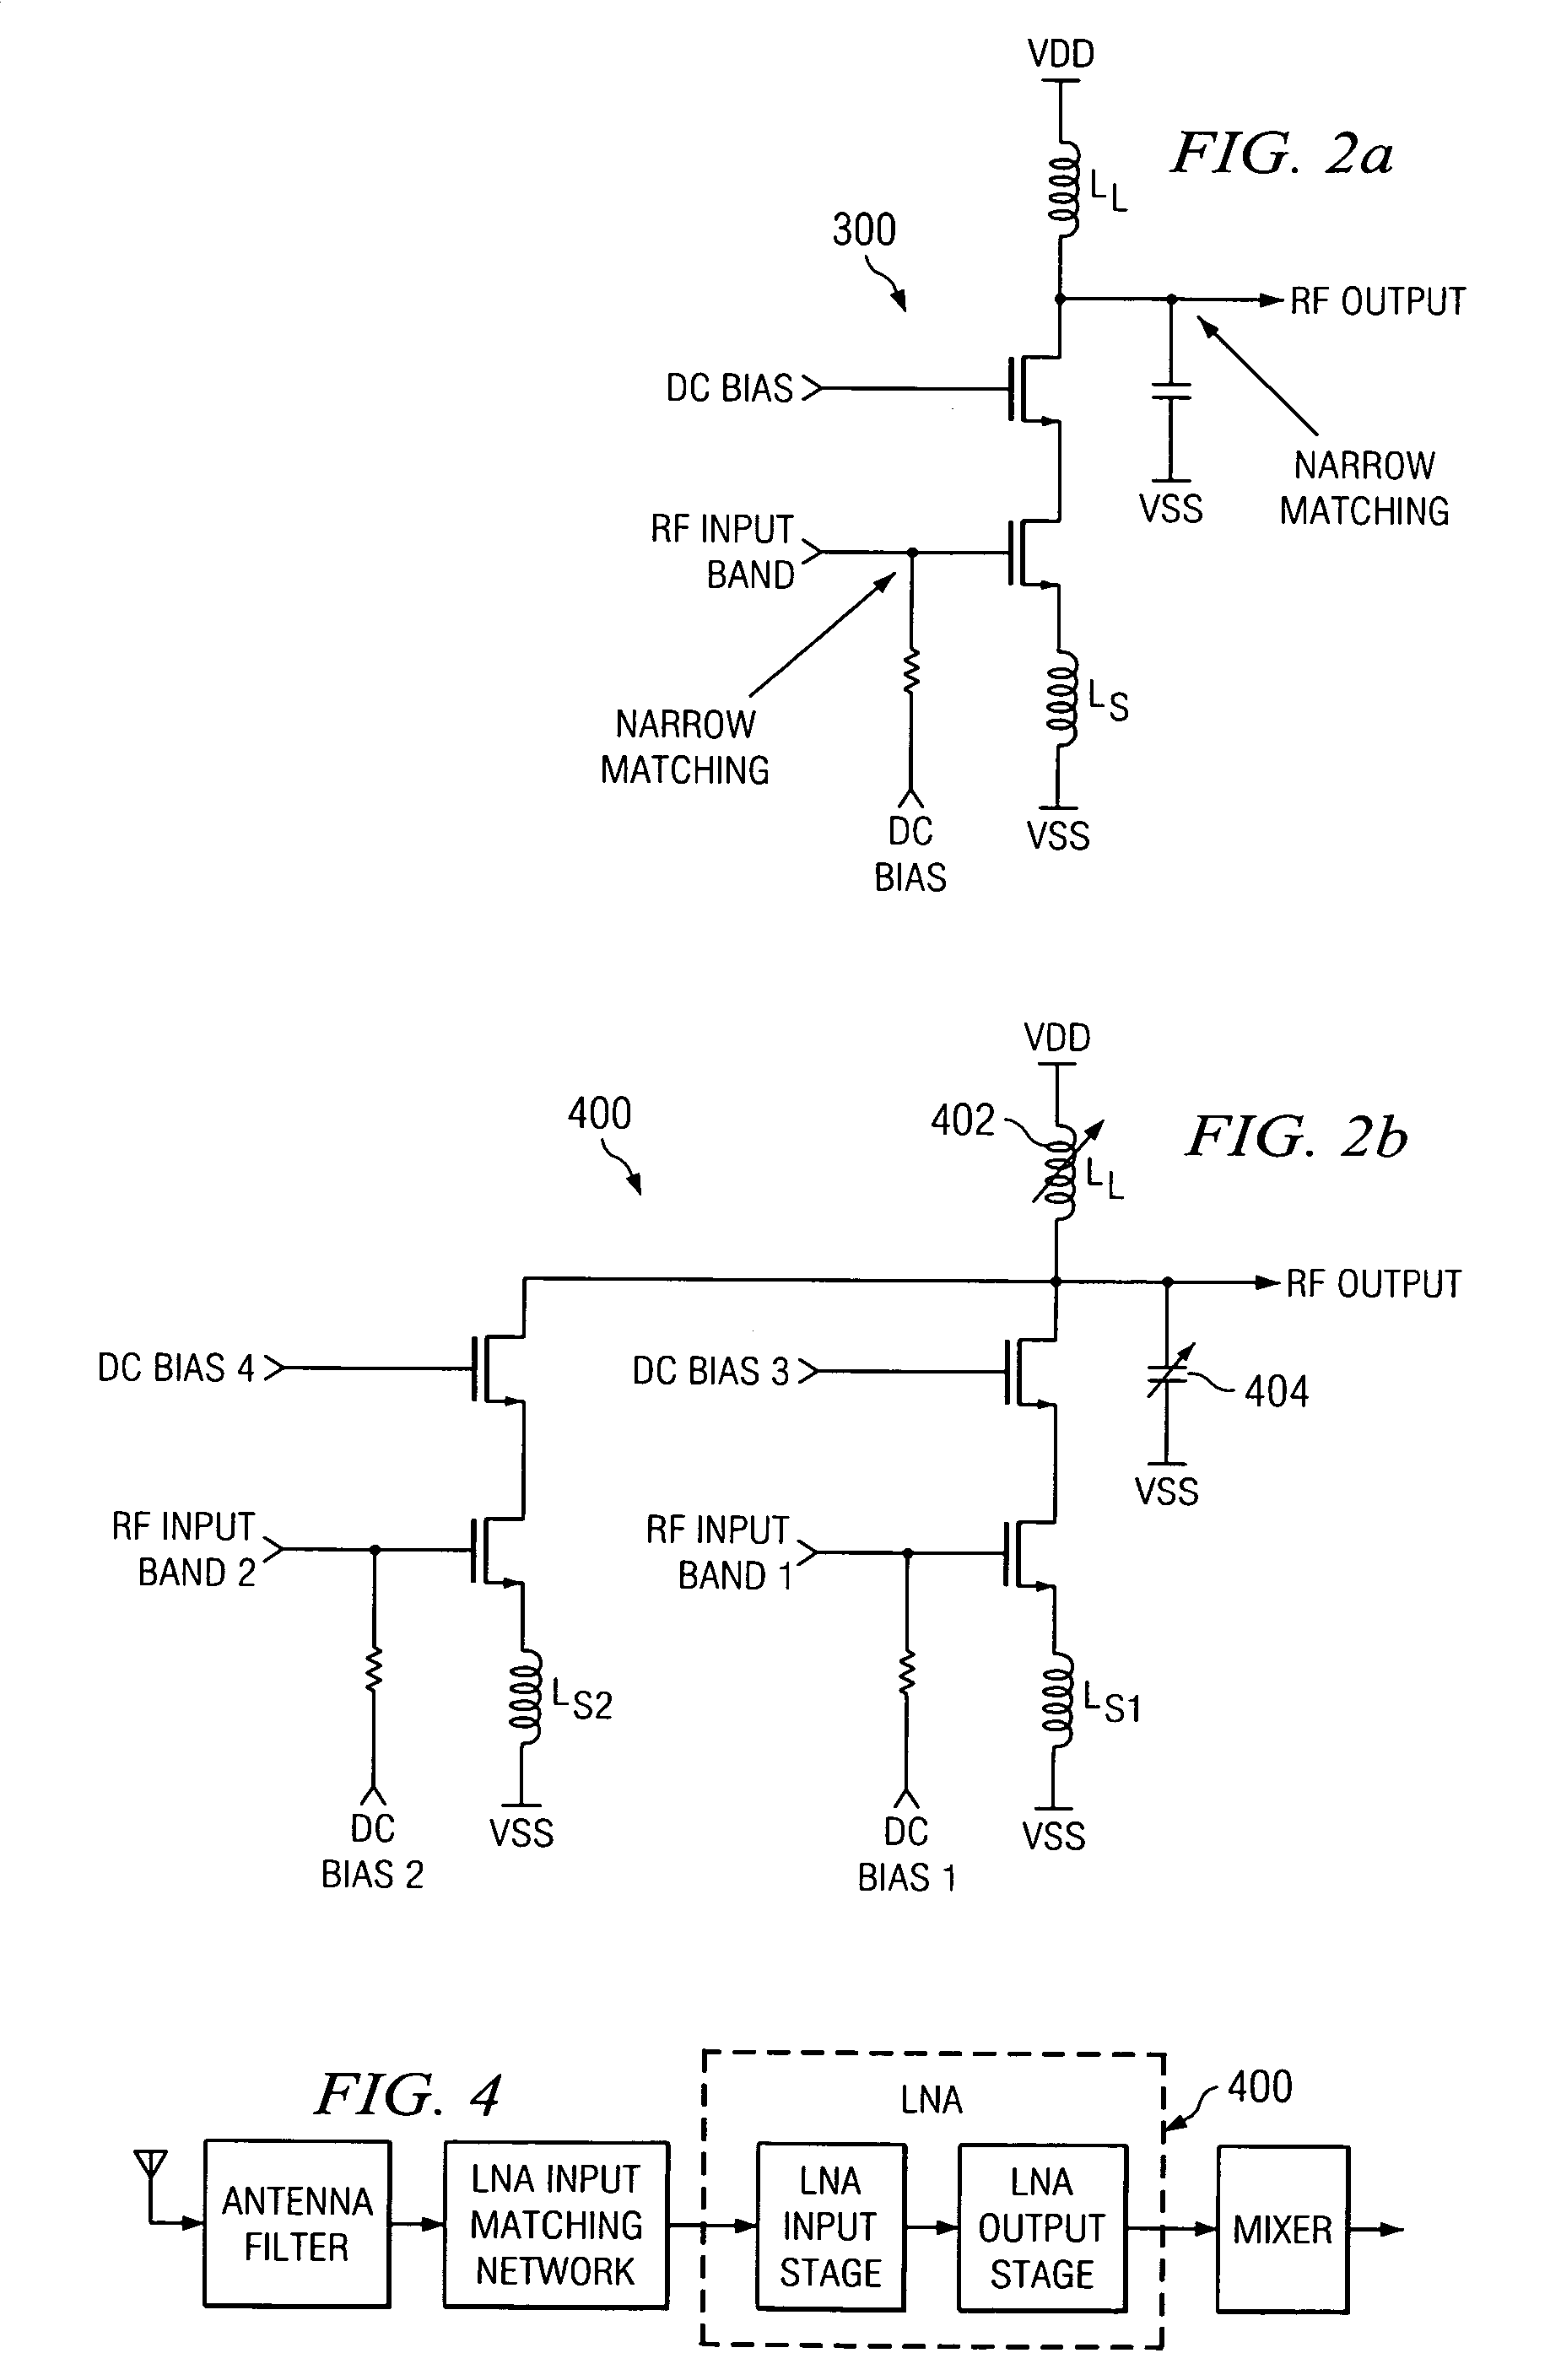 Multi-band low noise amplifier system